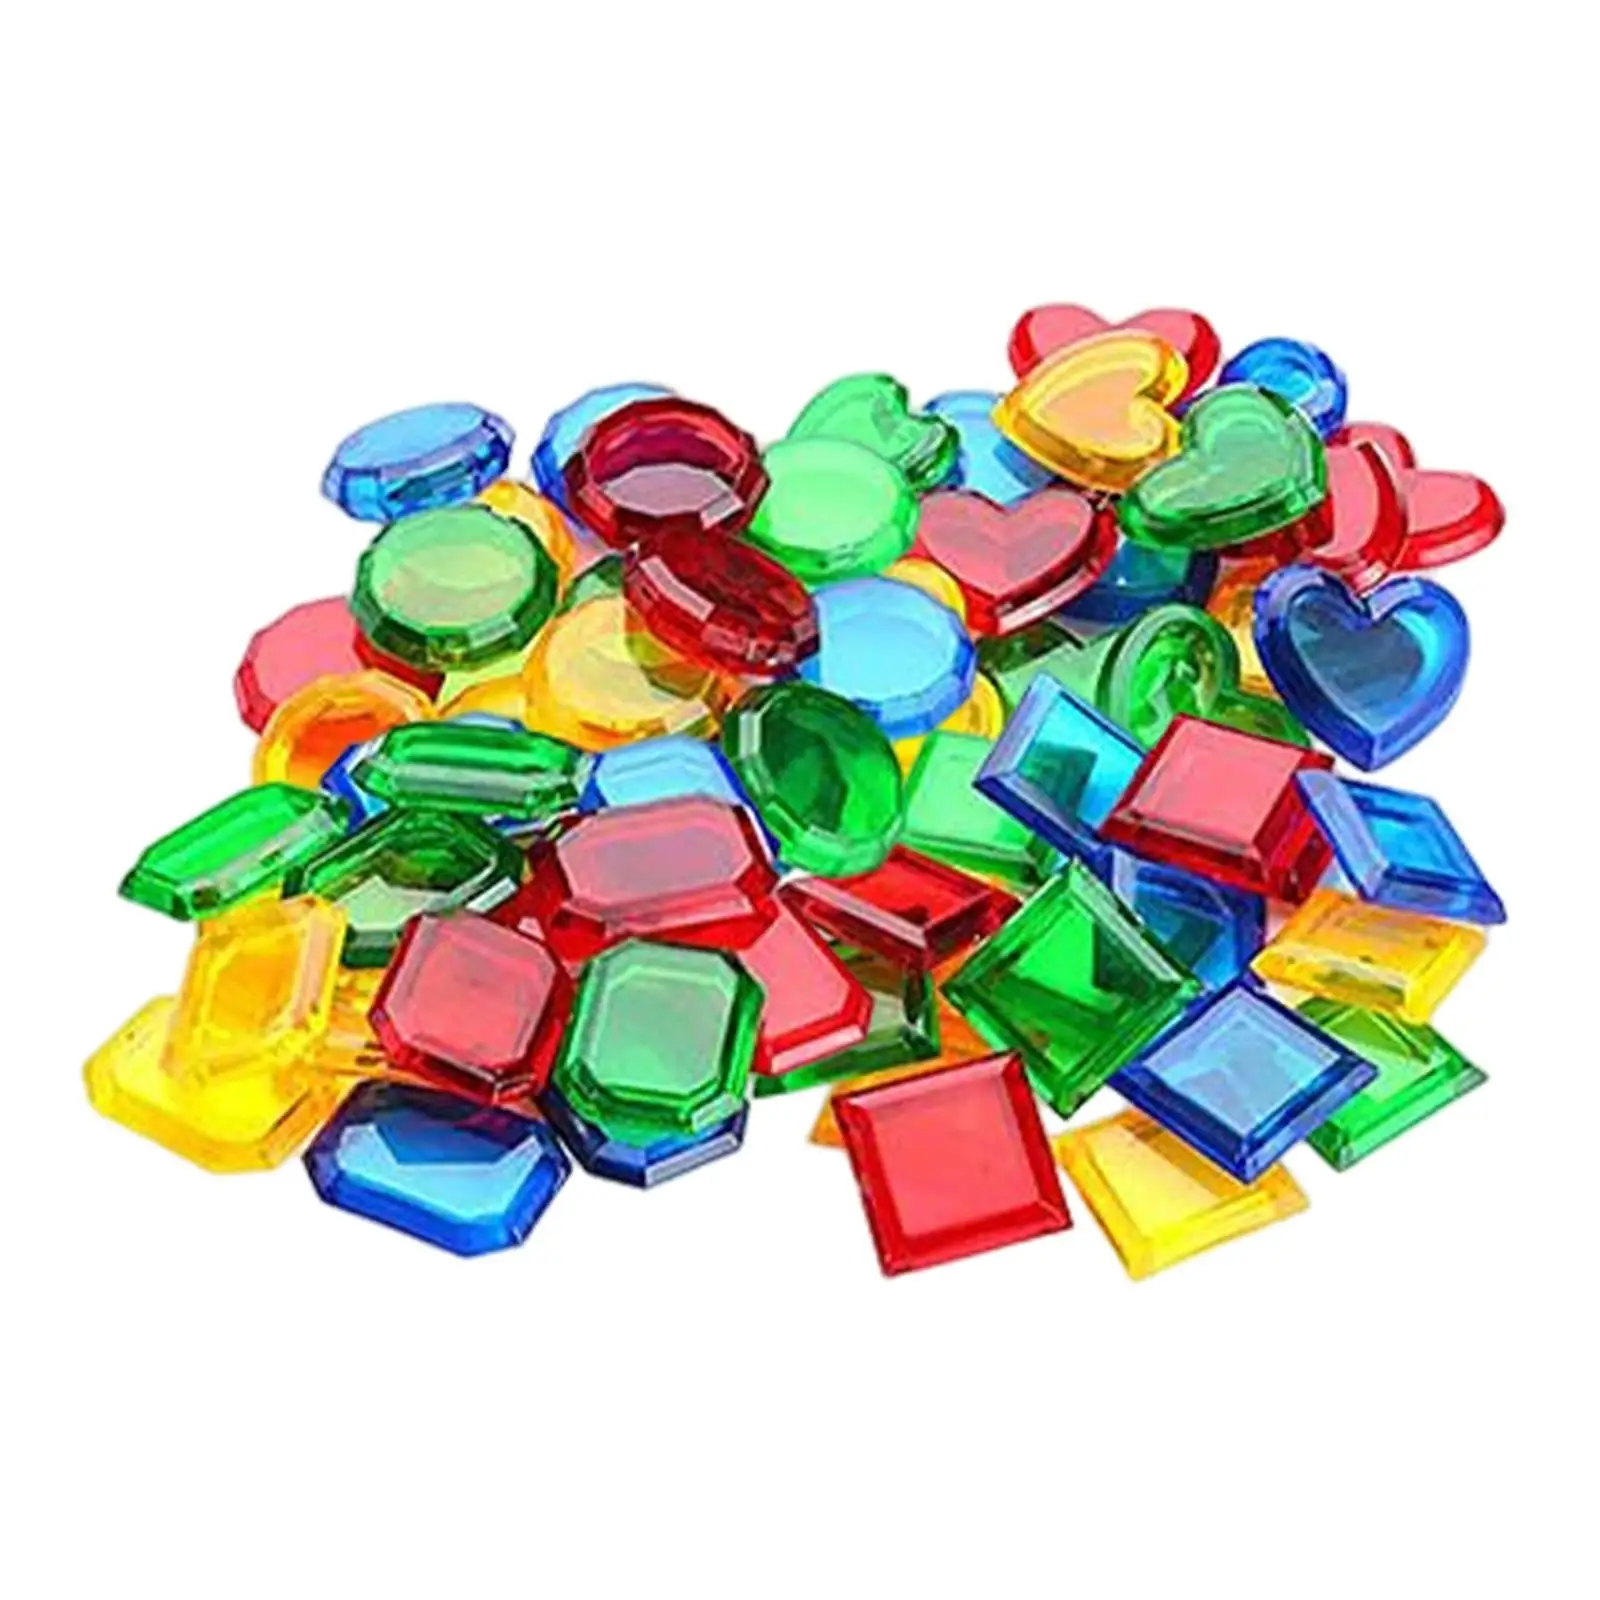 32Pcs Diving toy Sorting for Learning Activities Swimming Pool Beach